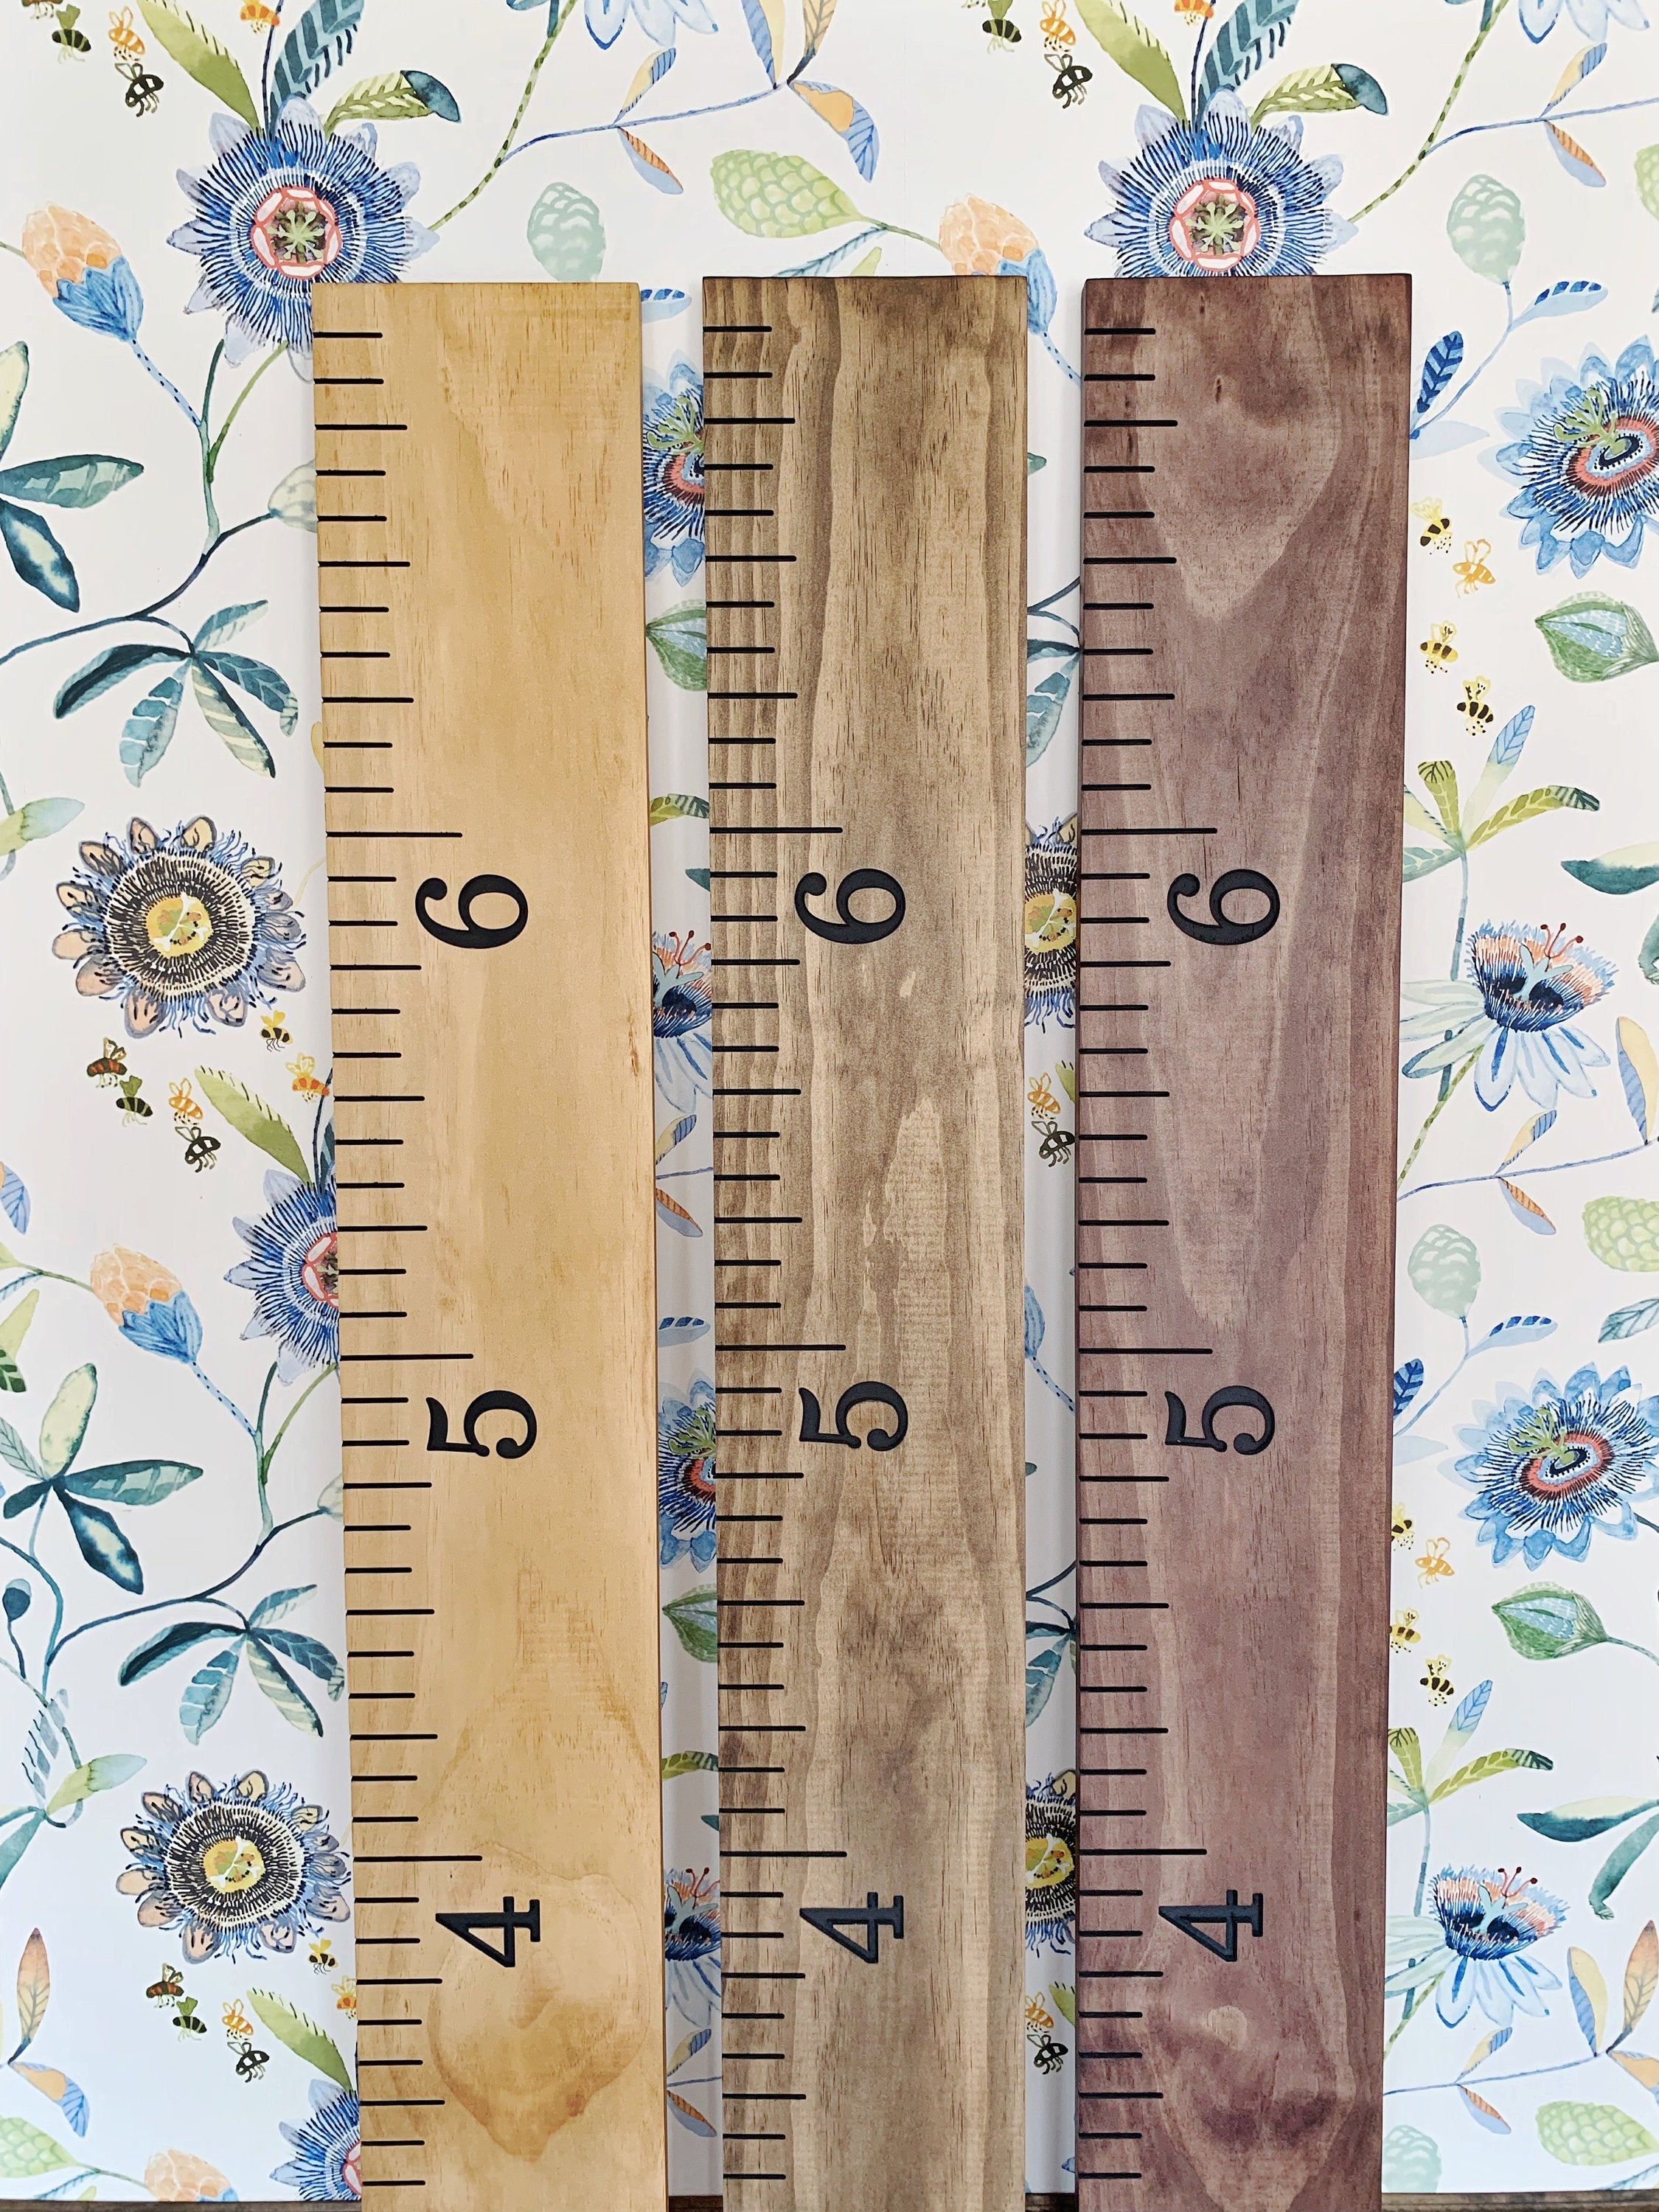 Growth Chart Made Of Wood